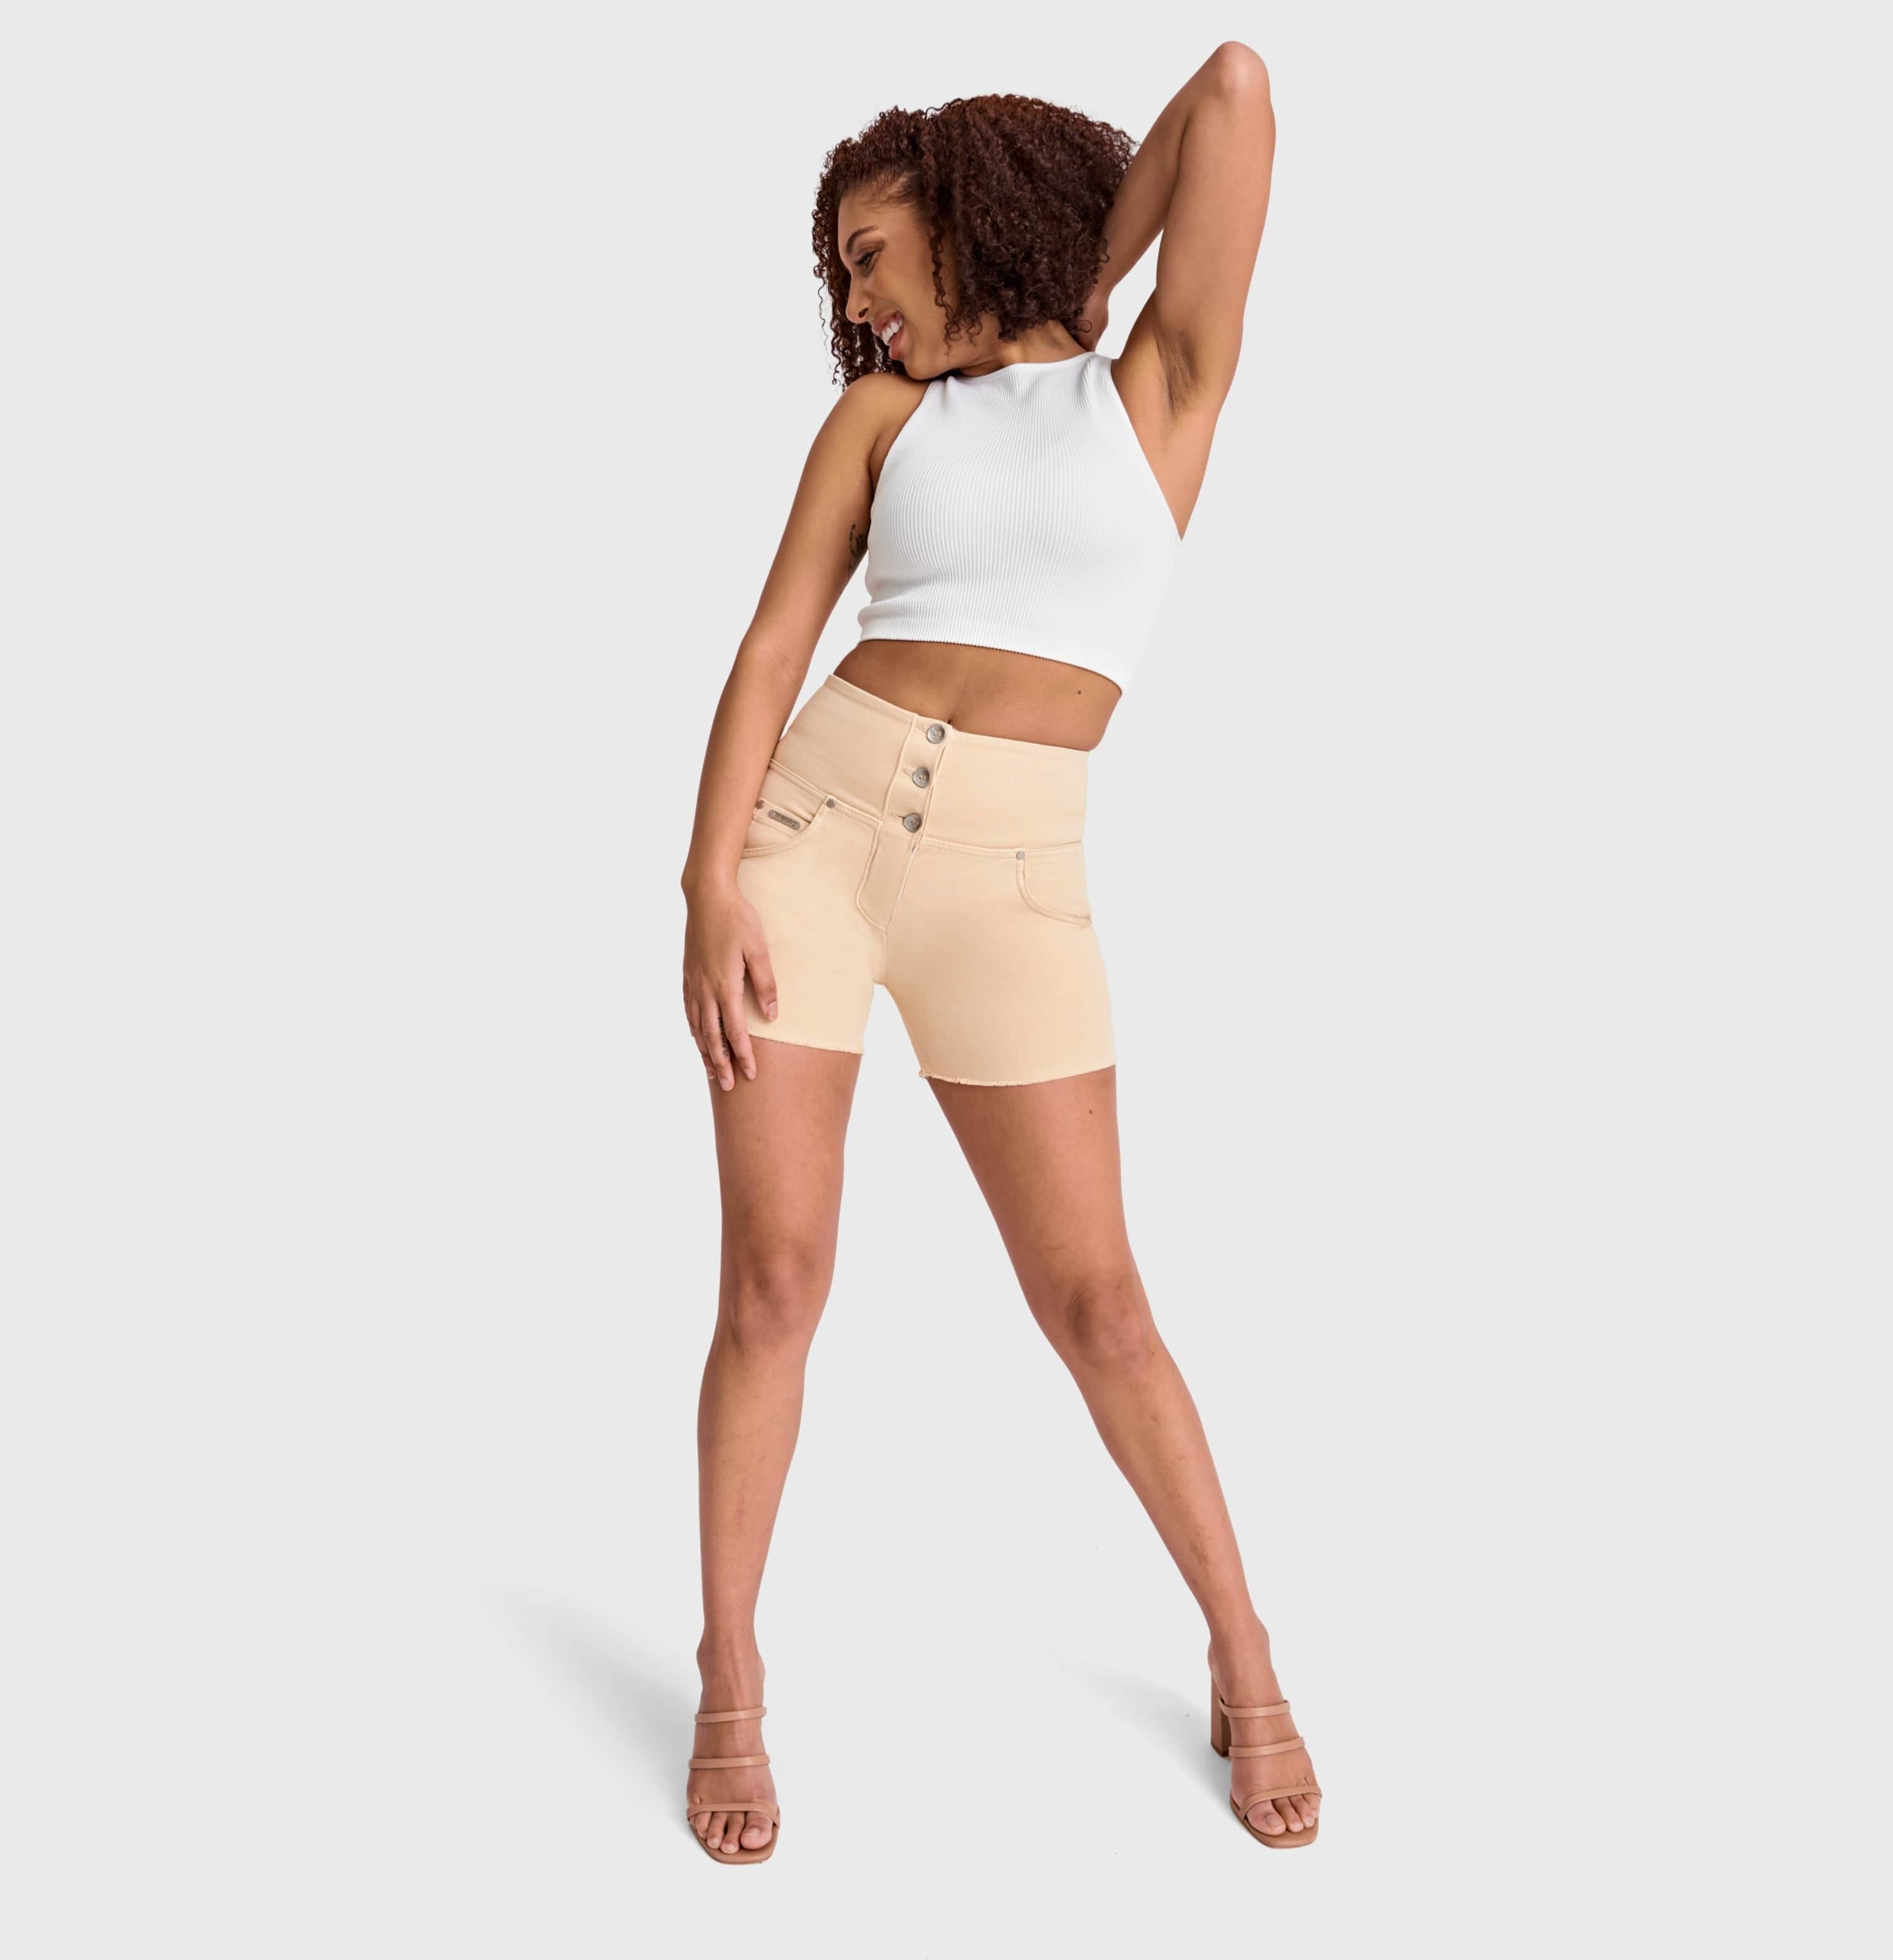 WR.UP® Snug Jeans - 3 Button High Waisted - Shorts - Beige 3